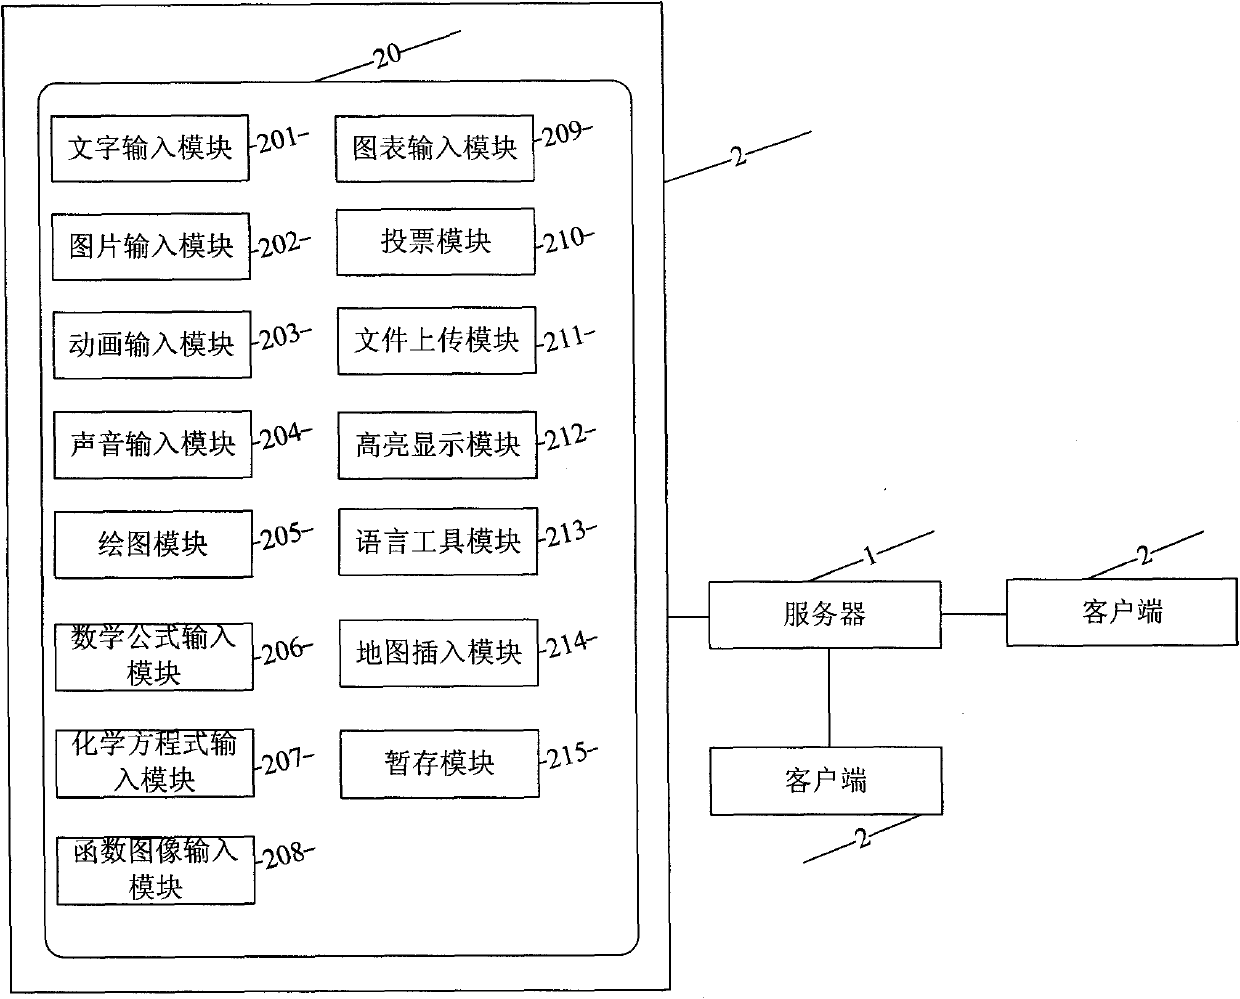 Network editor capable of inputting chemical equation and chemical structural formula and system